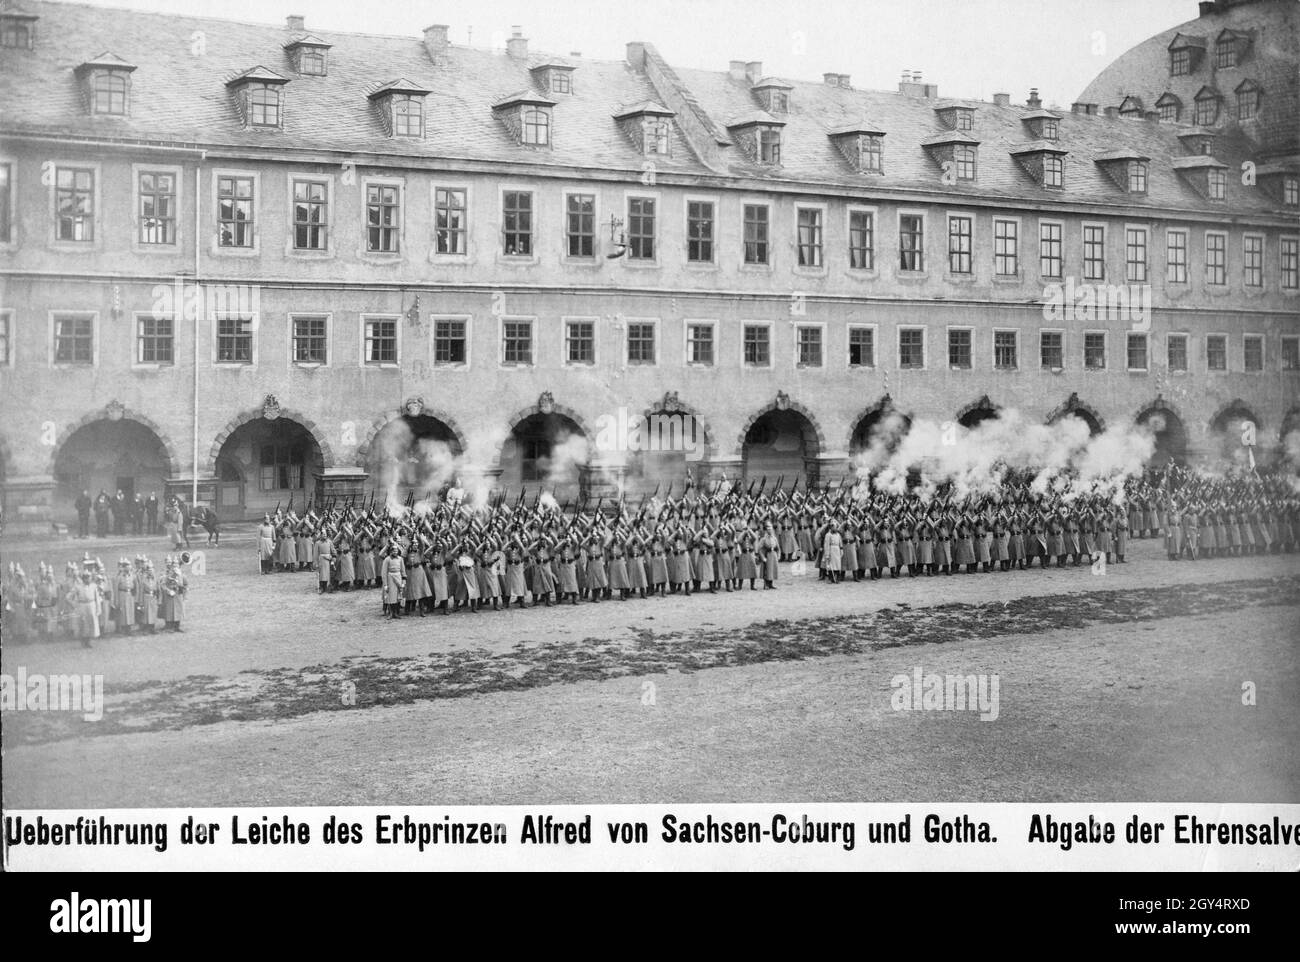 The coffin of Hereditary Prince Alfred of Saxe-Coburg and Gotha was transferred from Friedenstein Palace in Gotha to the Palace Church in February 1899. The prince had died as a result of a suicide attempt in Meran on 6 February 1899. Soldiers stand in the inner courtyard of Friedenstein Palace and fire salutes of honour. [automated translation] Stock Photo